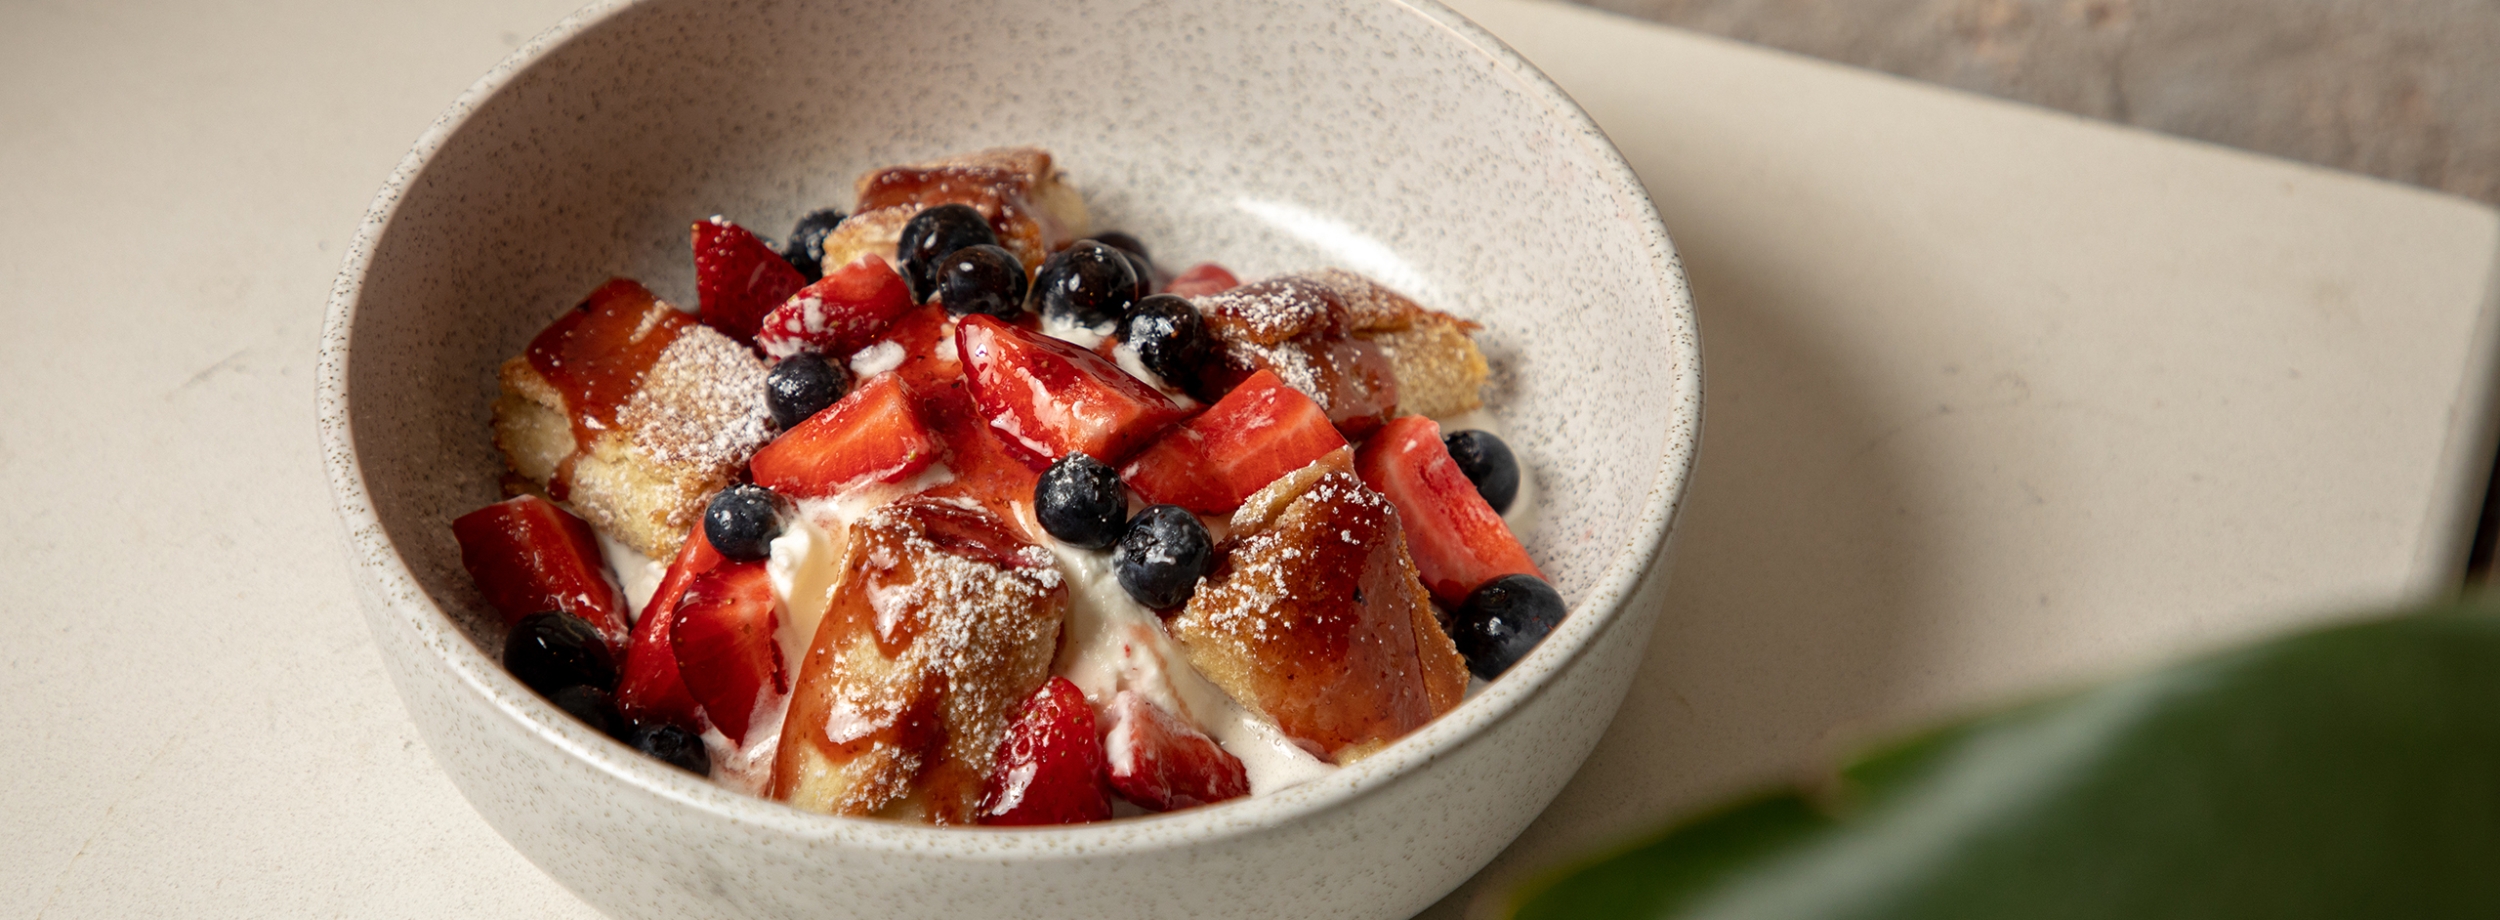 A berry and creme brunch bowl from Couvant restaurant in New Orleans